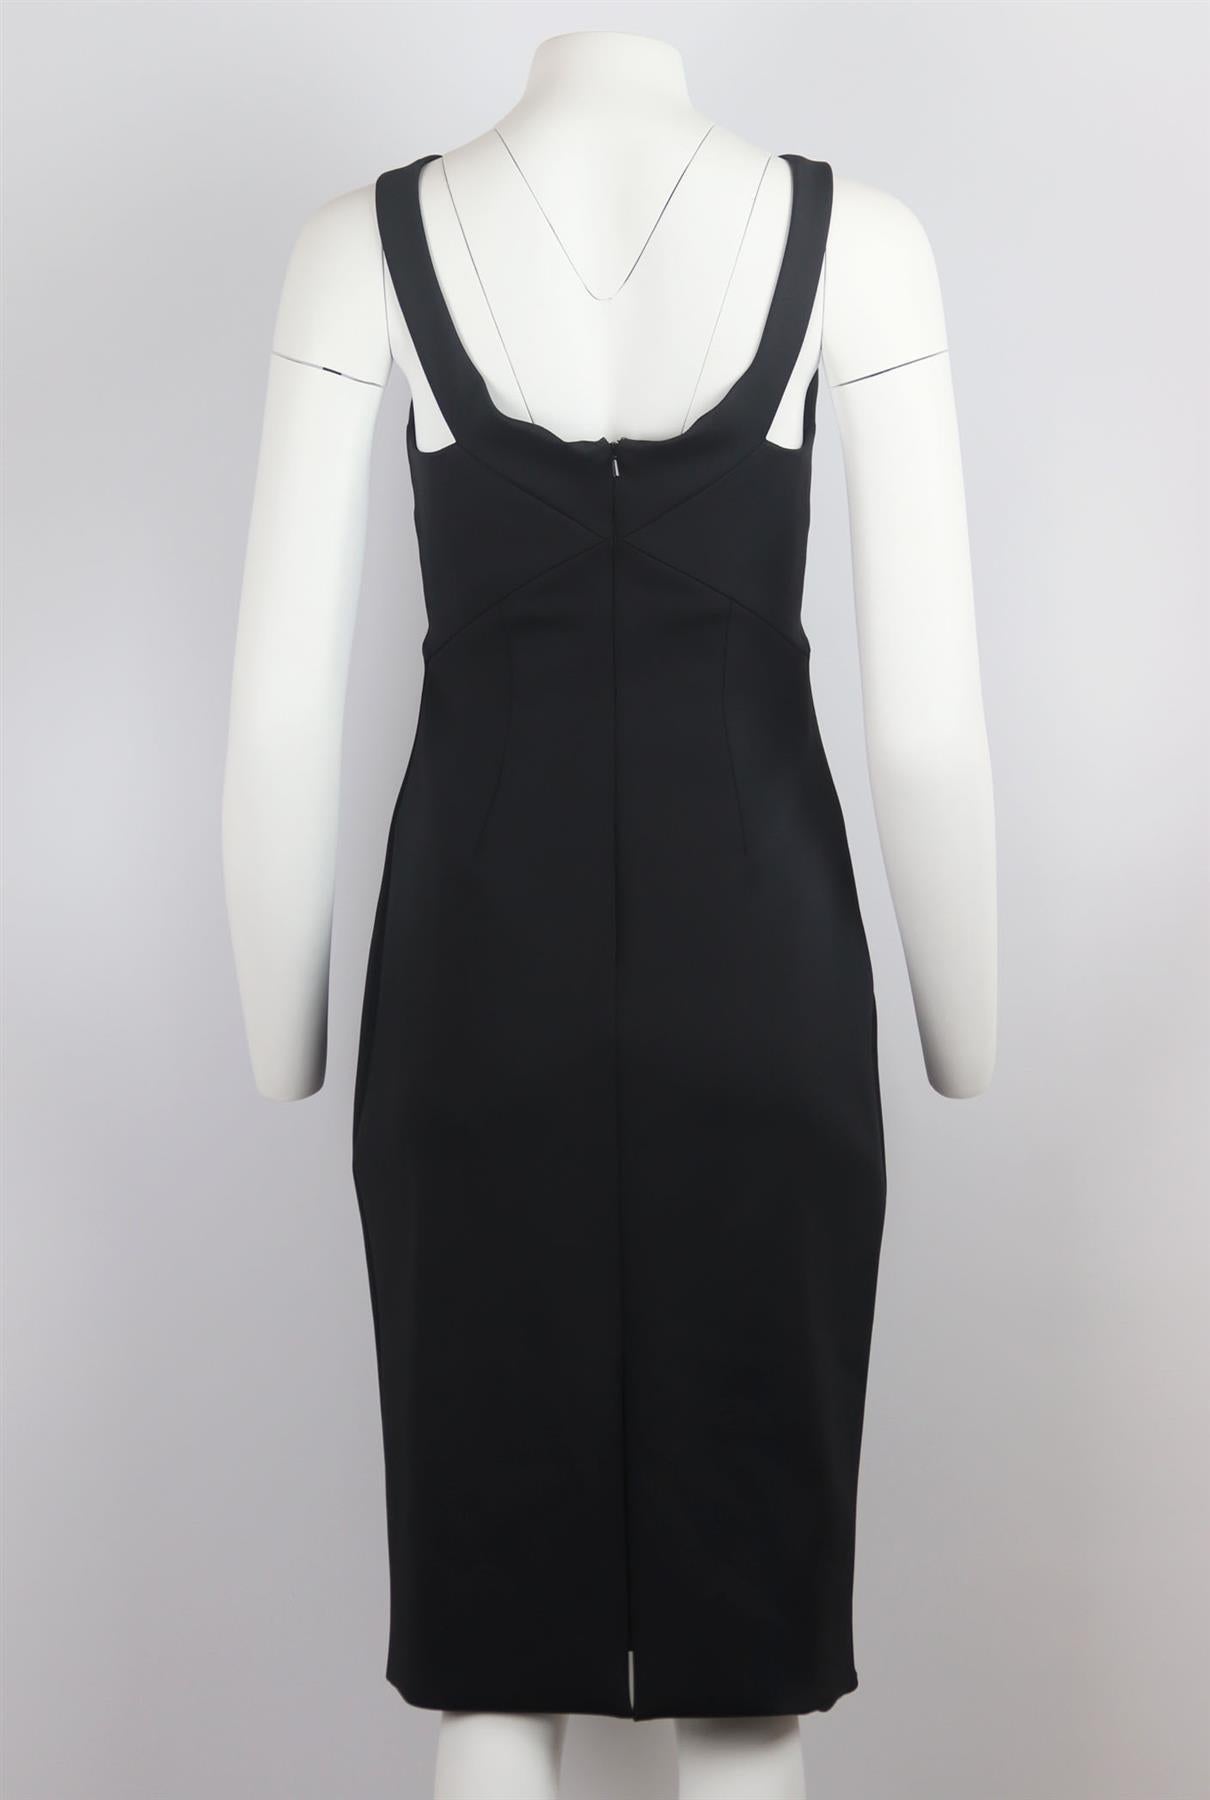 Cushnie et Och’s versatile dress will be one of the most valuable additions to your wardrobe, it’s made from body-skimming stretch-scuba and has cutout detail at the bust and shoulders to ensure a flattering fit. Black stretch-scuba. Concealed zip